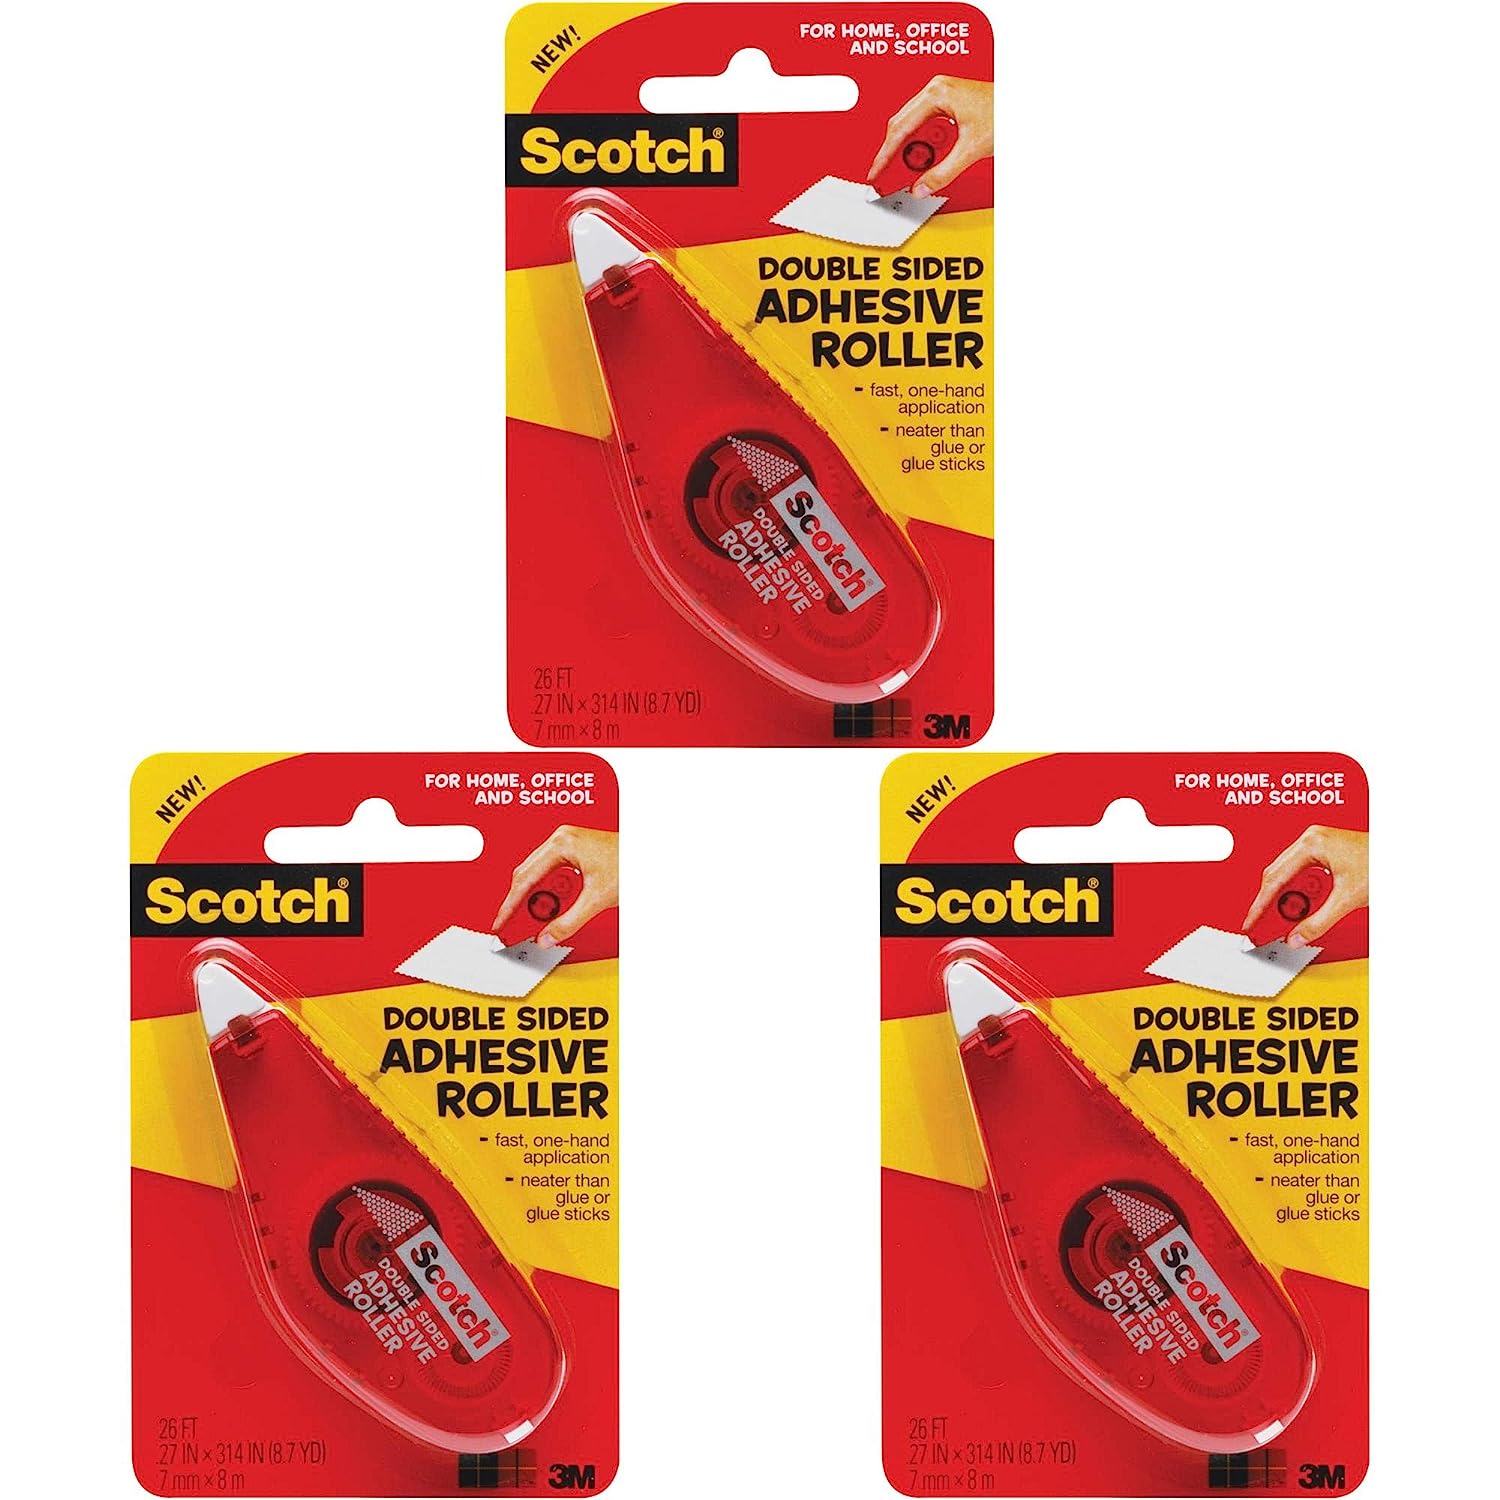 3M Bulk Buy 6061 Scotch Double Sided Adhesive Roller [...]